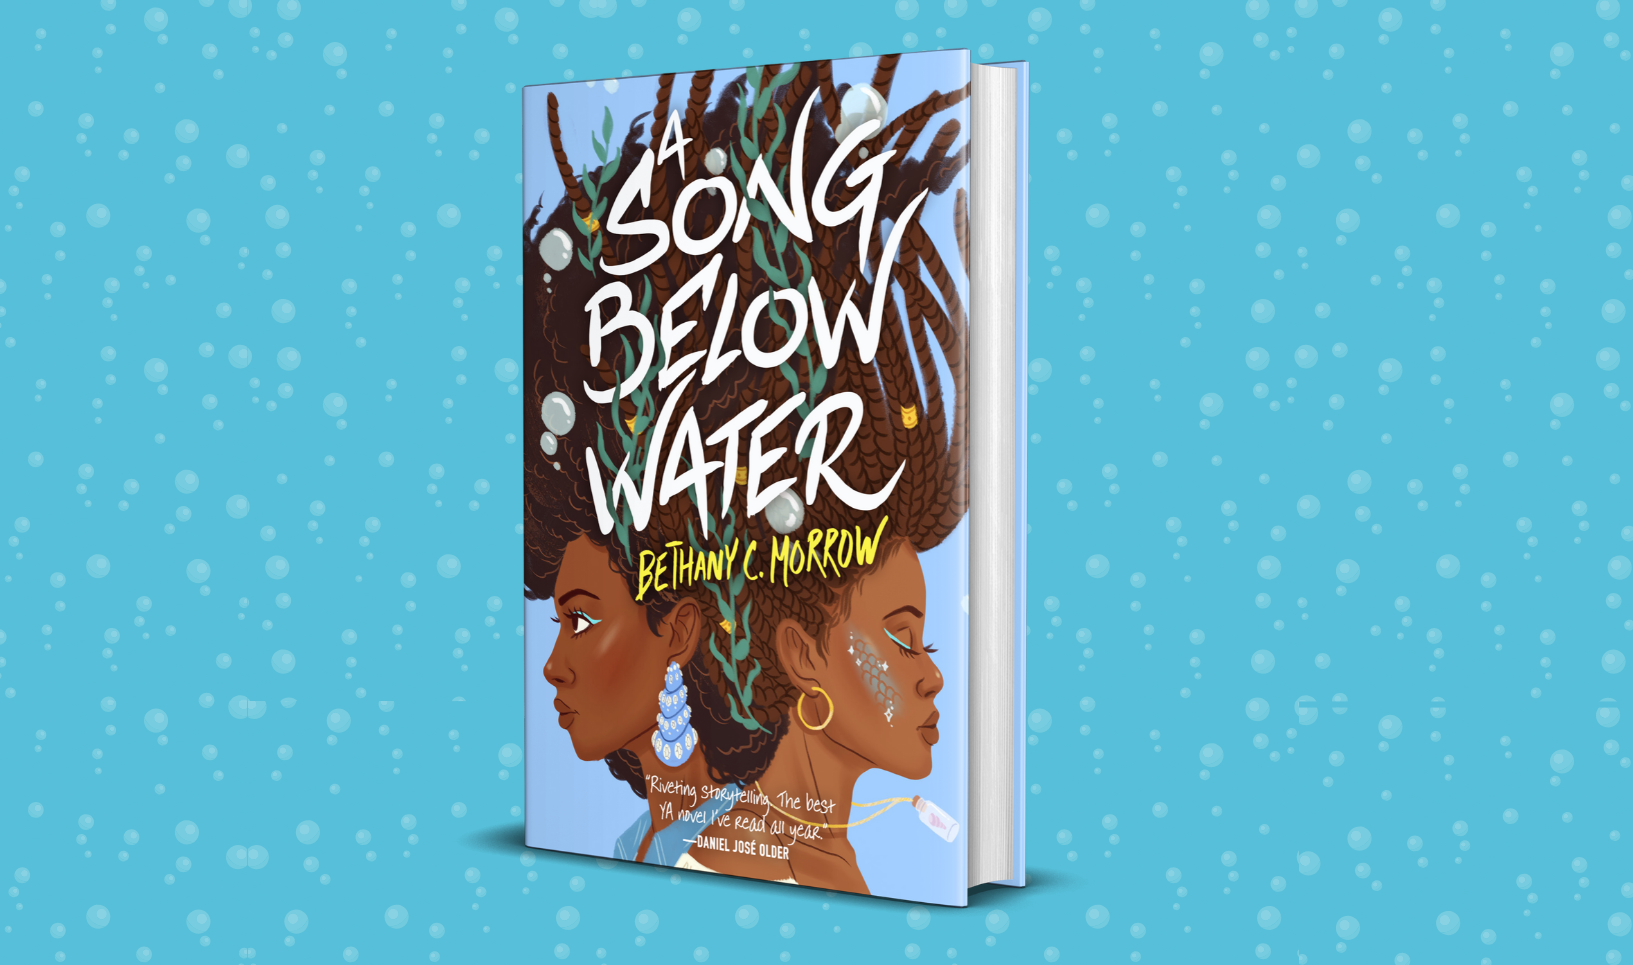 Download a Free Digital Preview of <i>A Song Below Water</i> by Bethany C. Morrow!